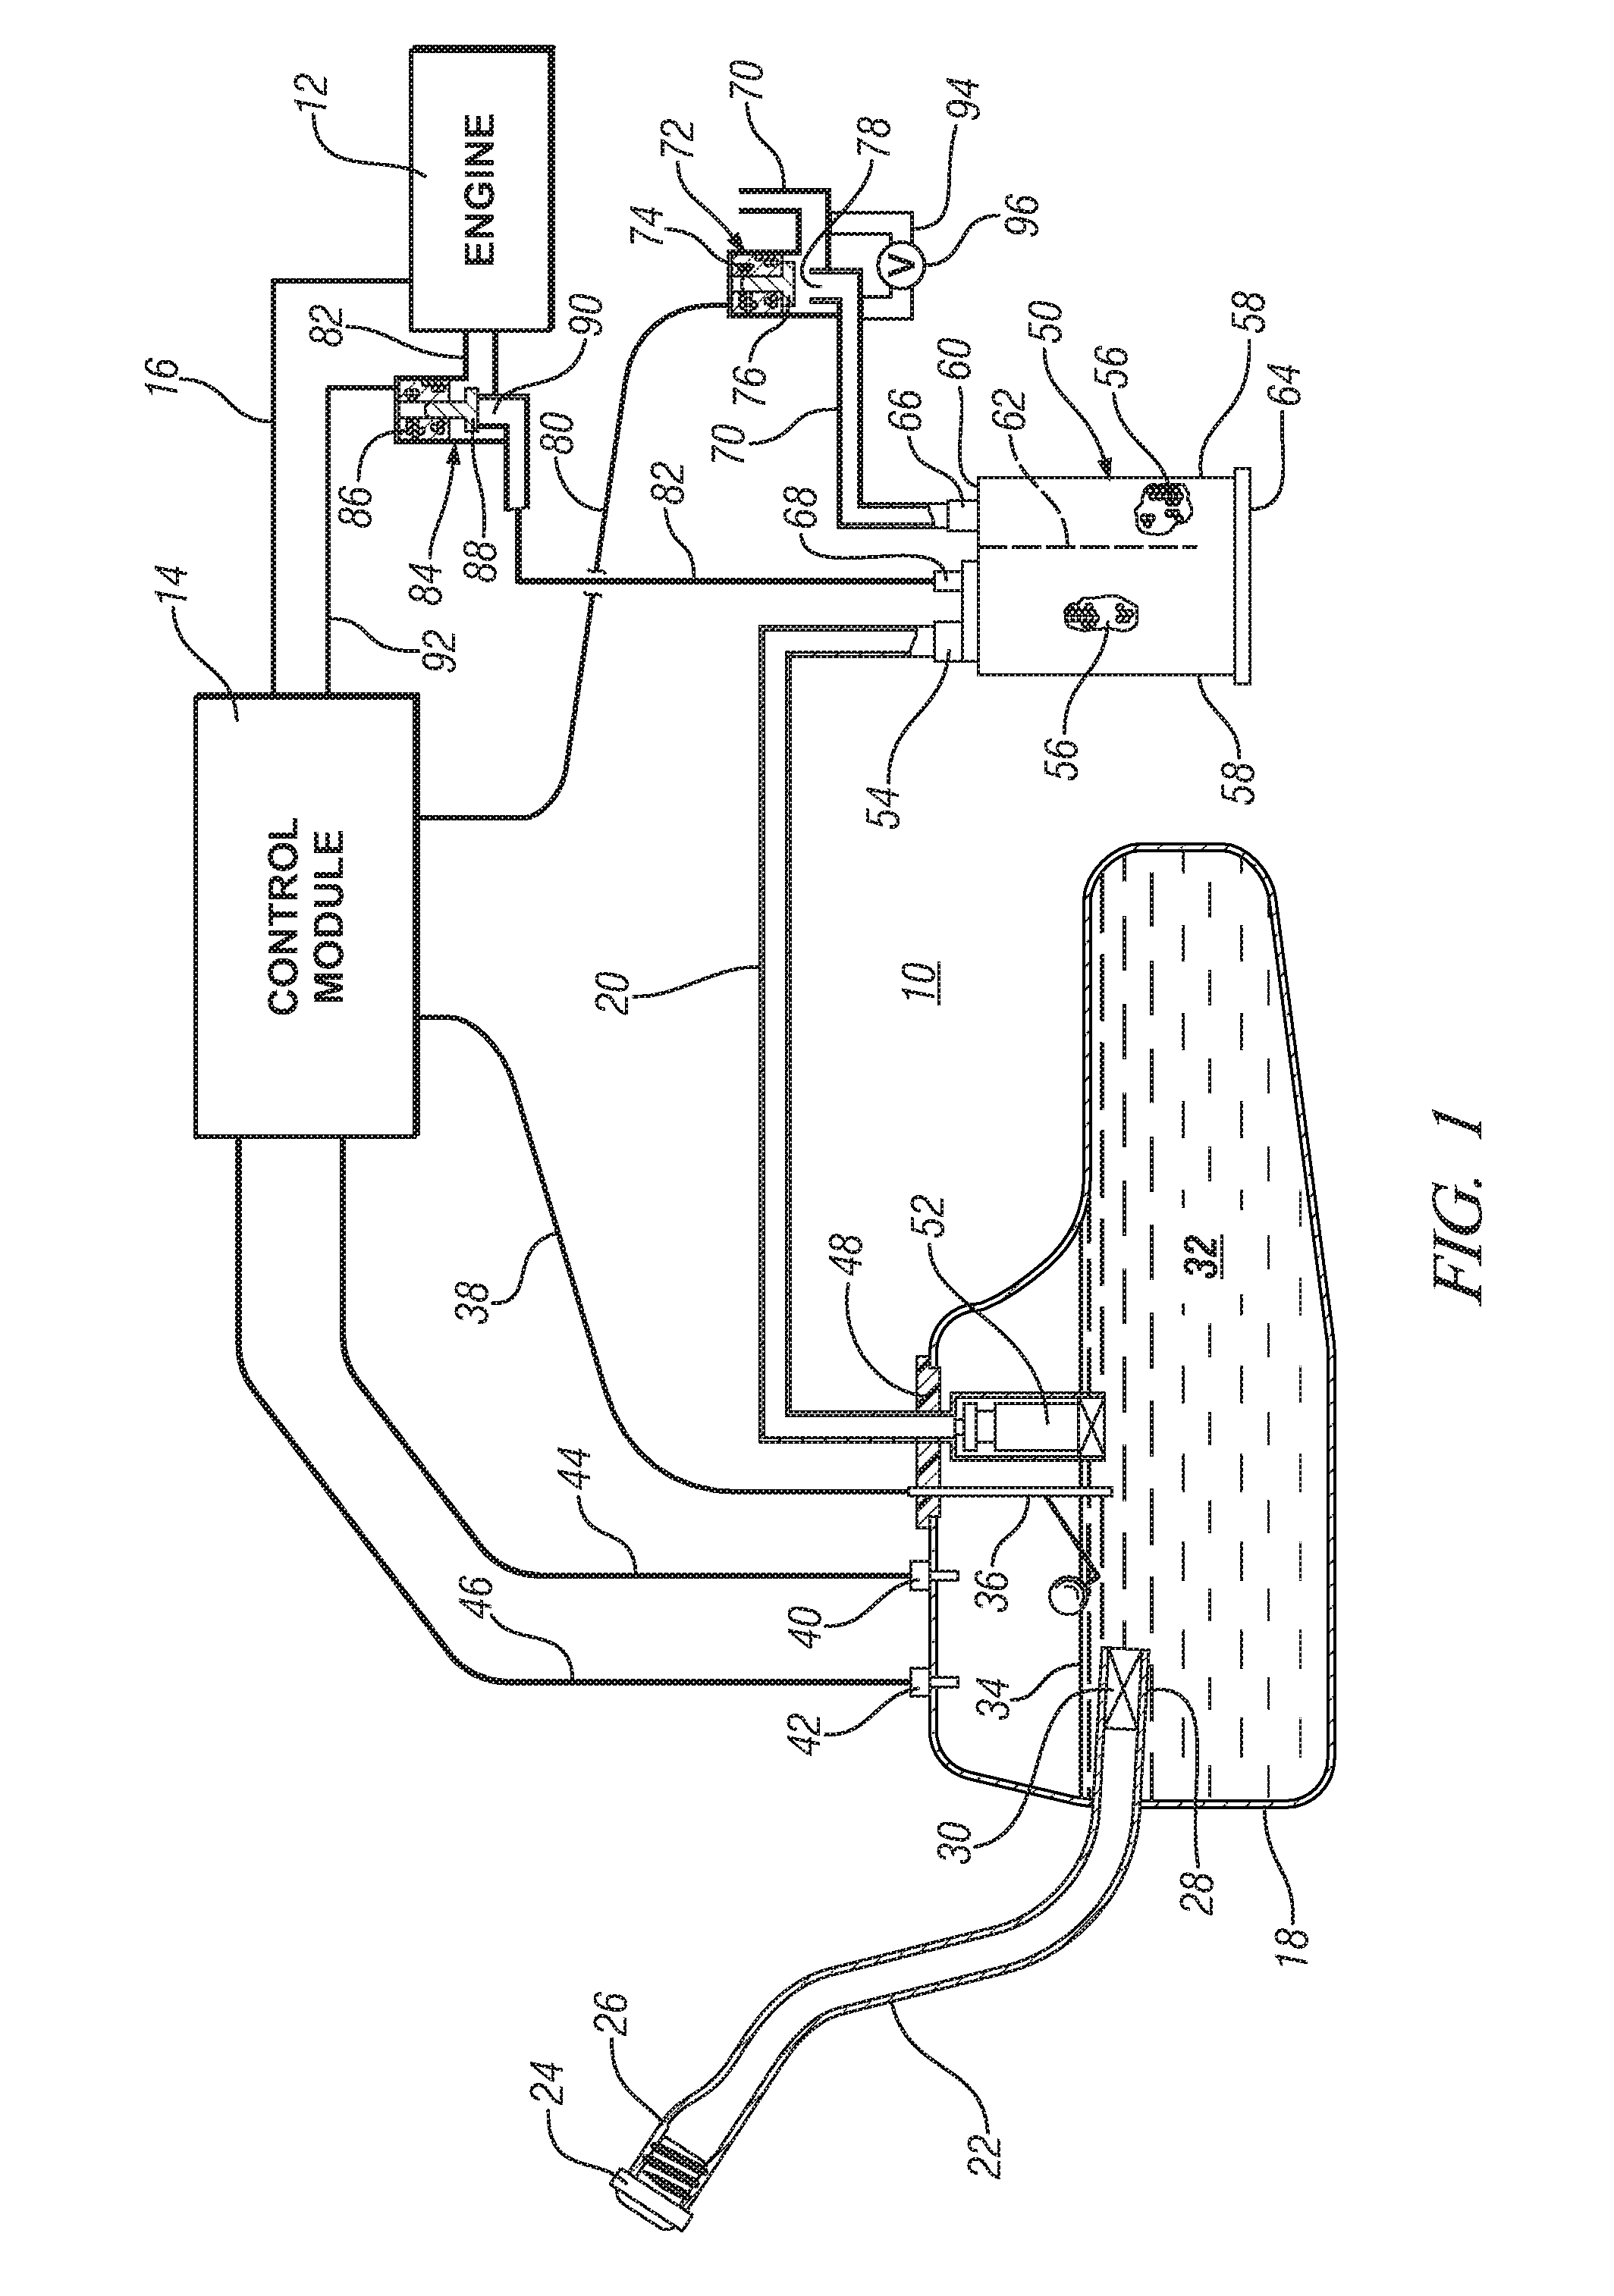 Evaporative emission control in battery powered vehicle with gasoline engine powered generator